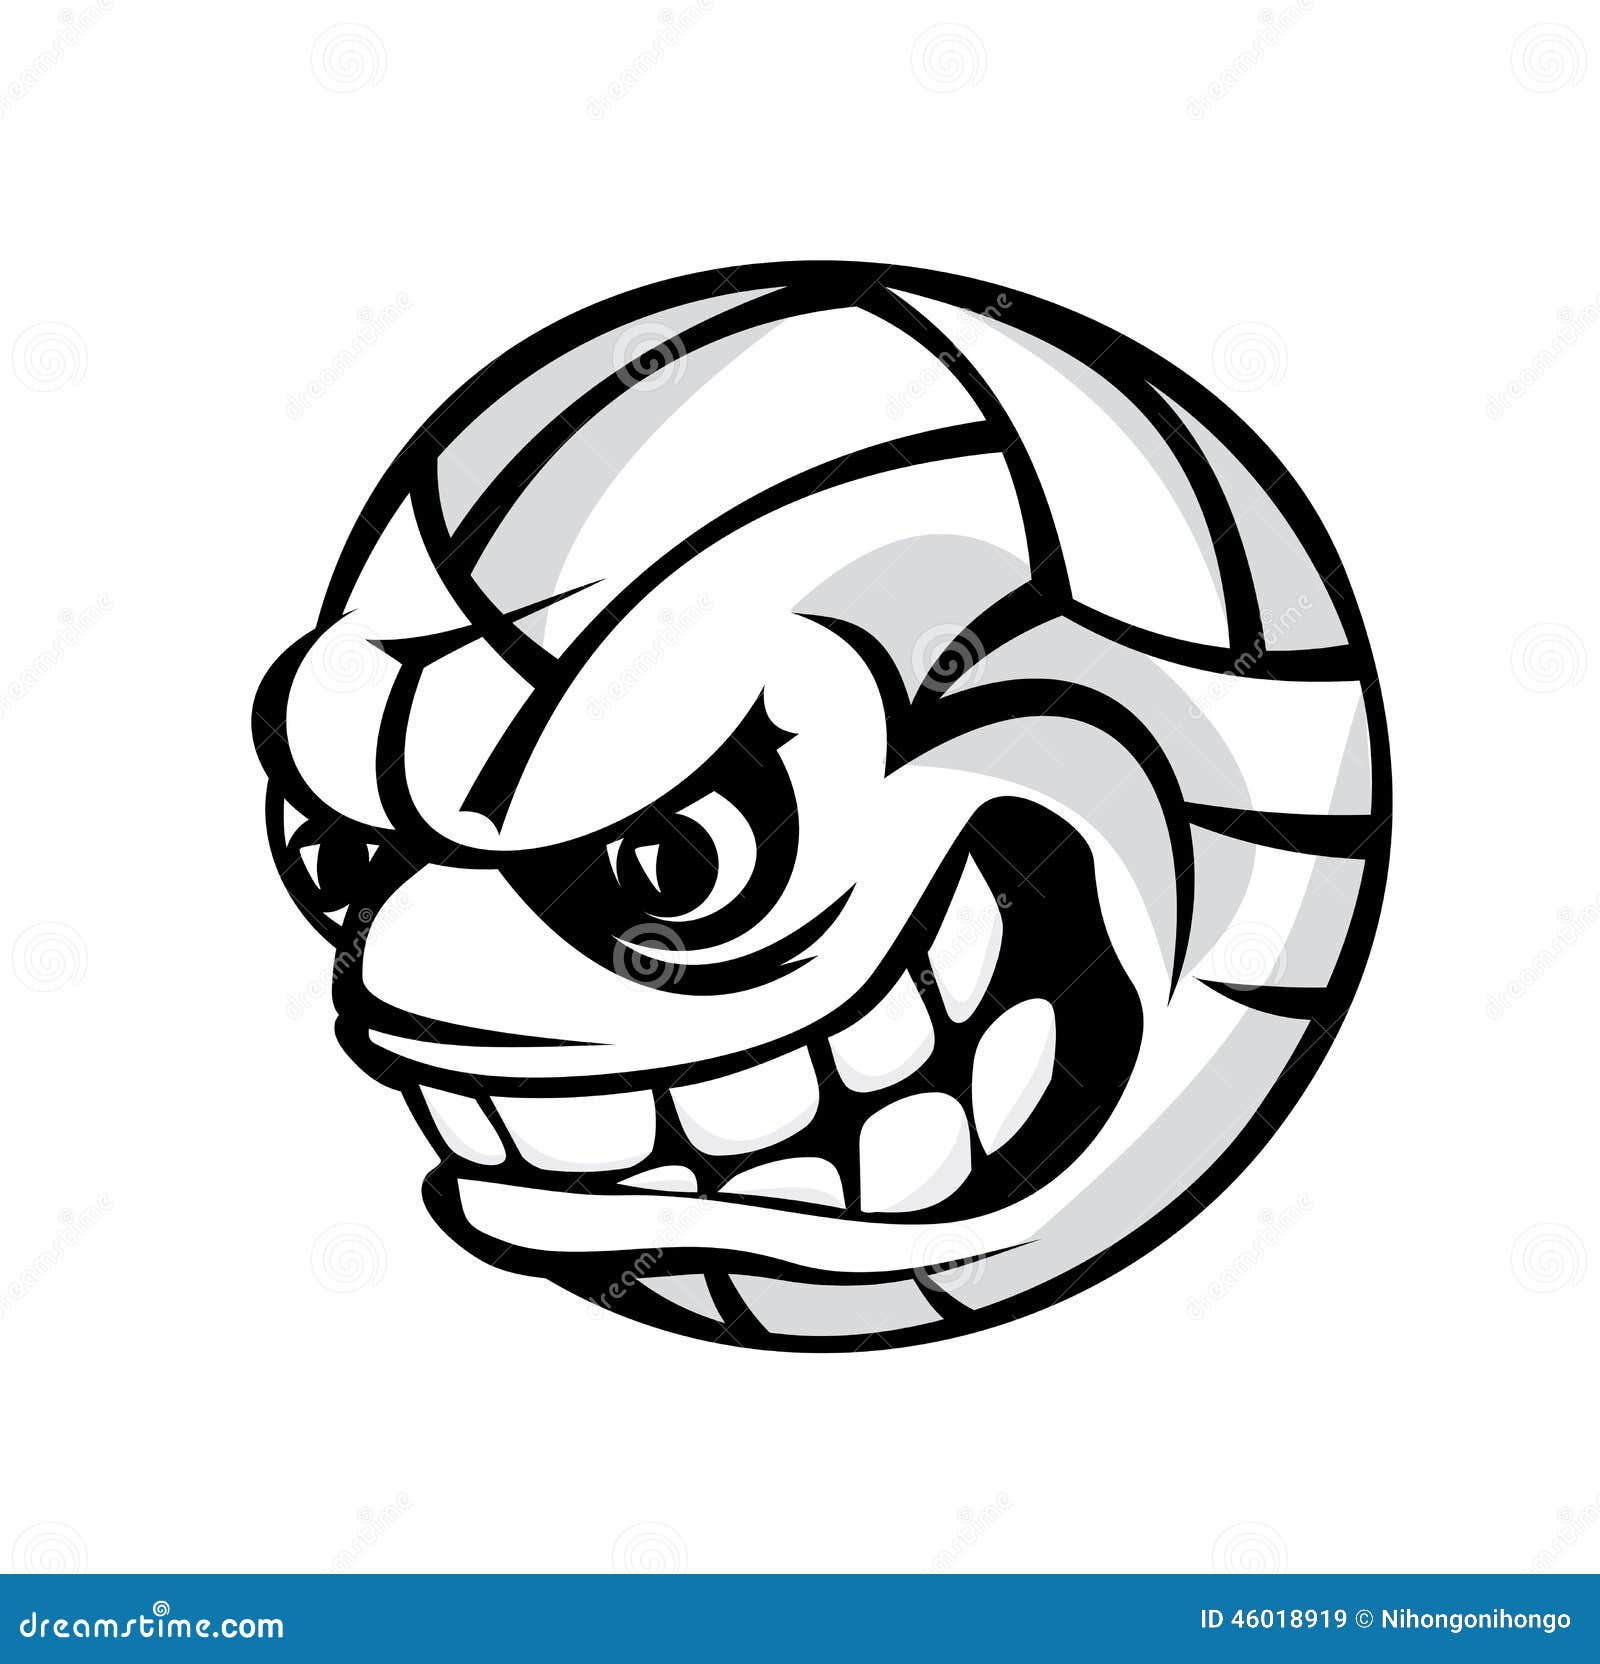 volleyball clipart with no background - photo #47